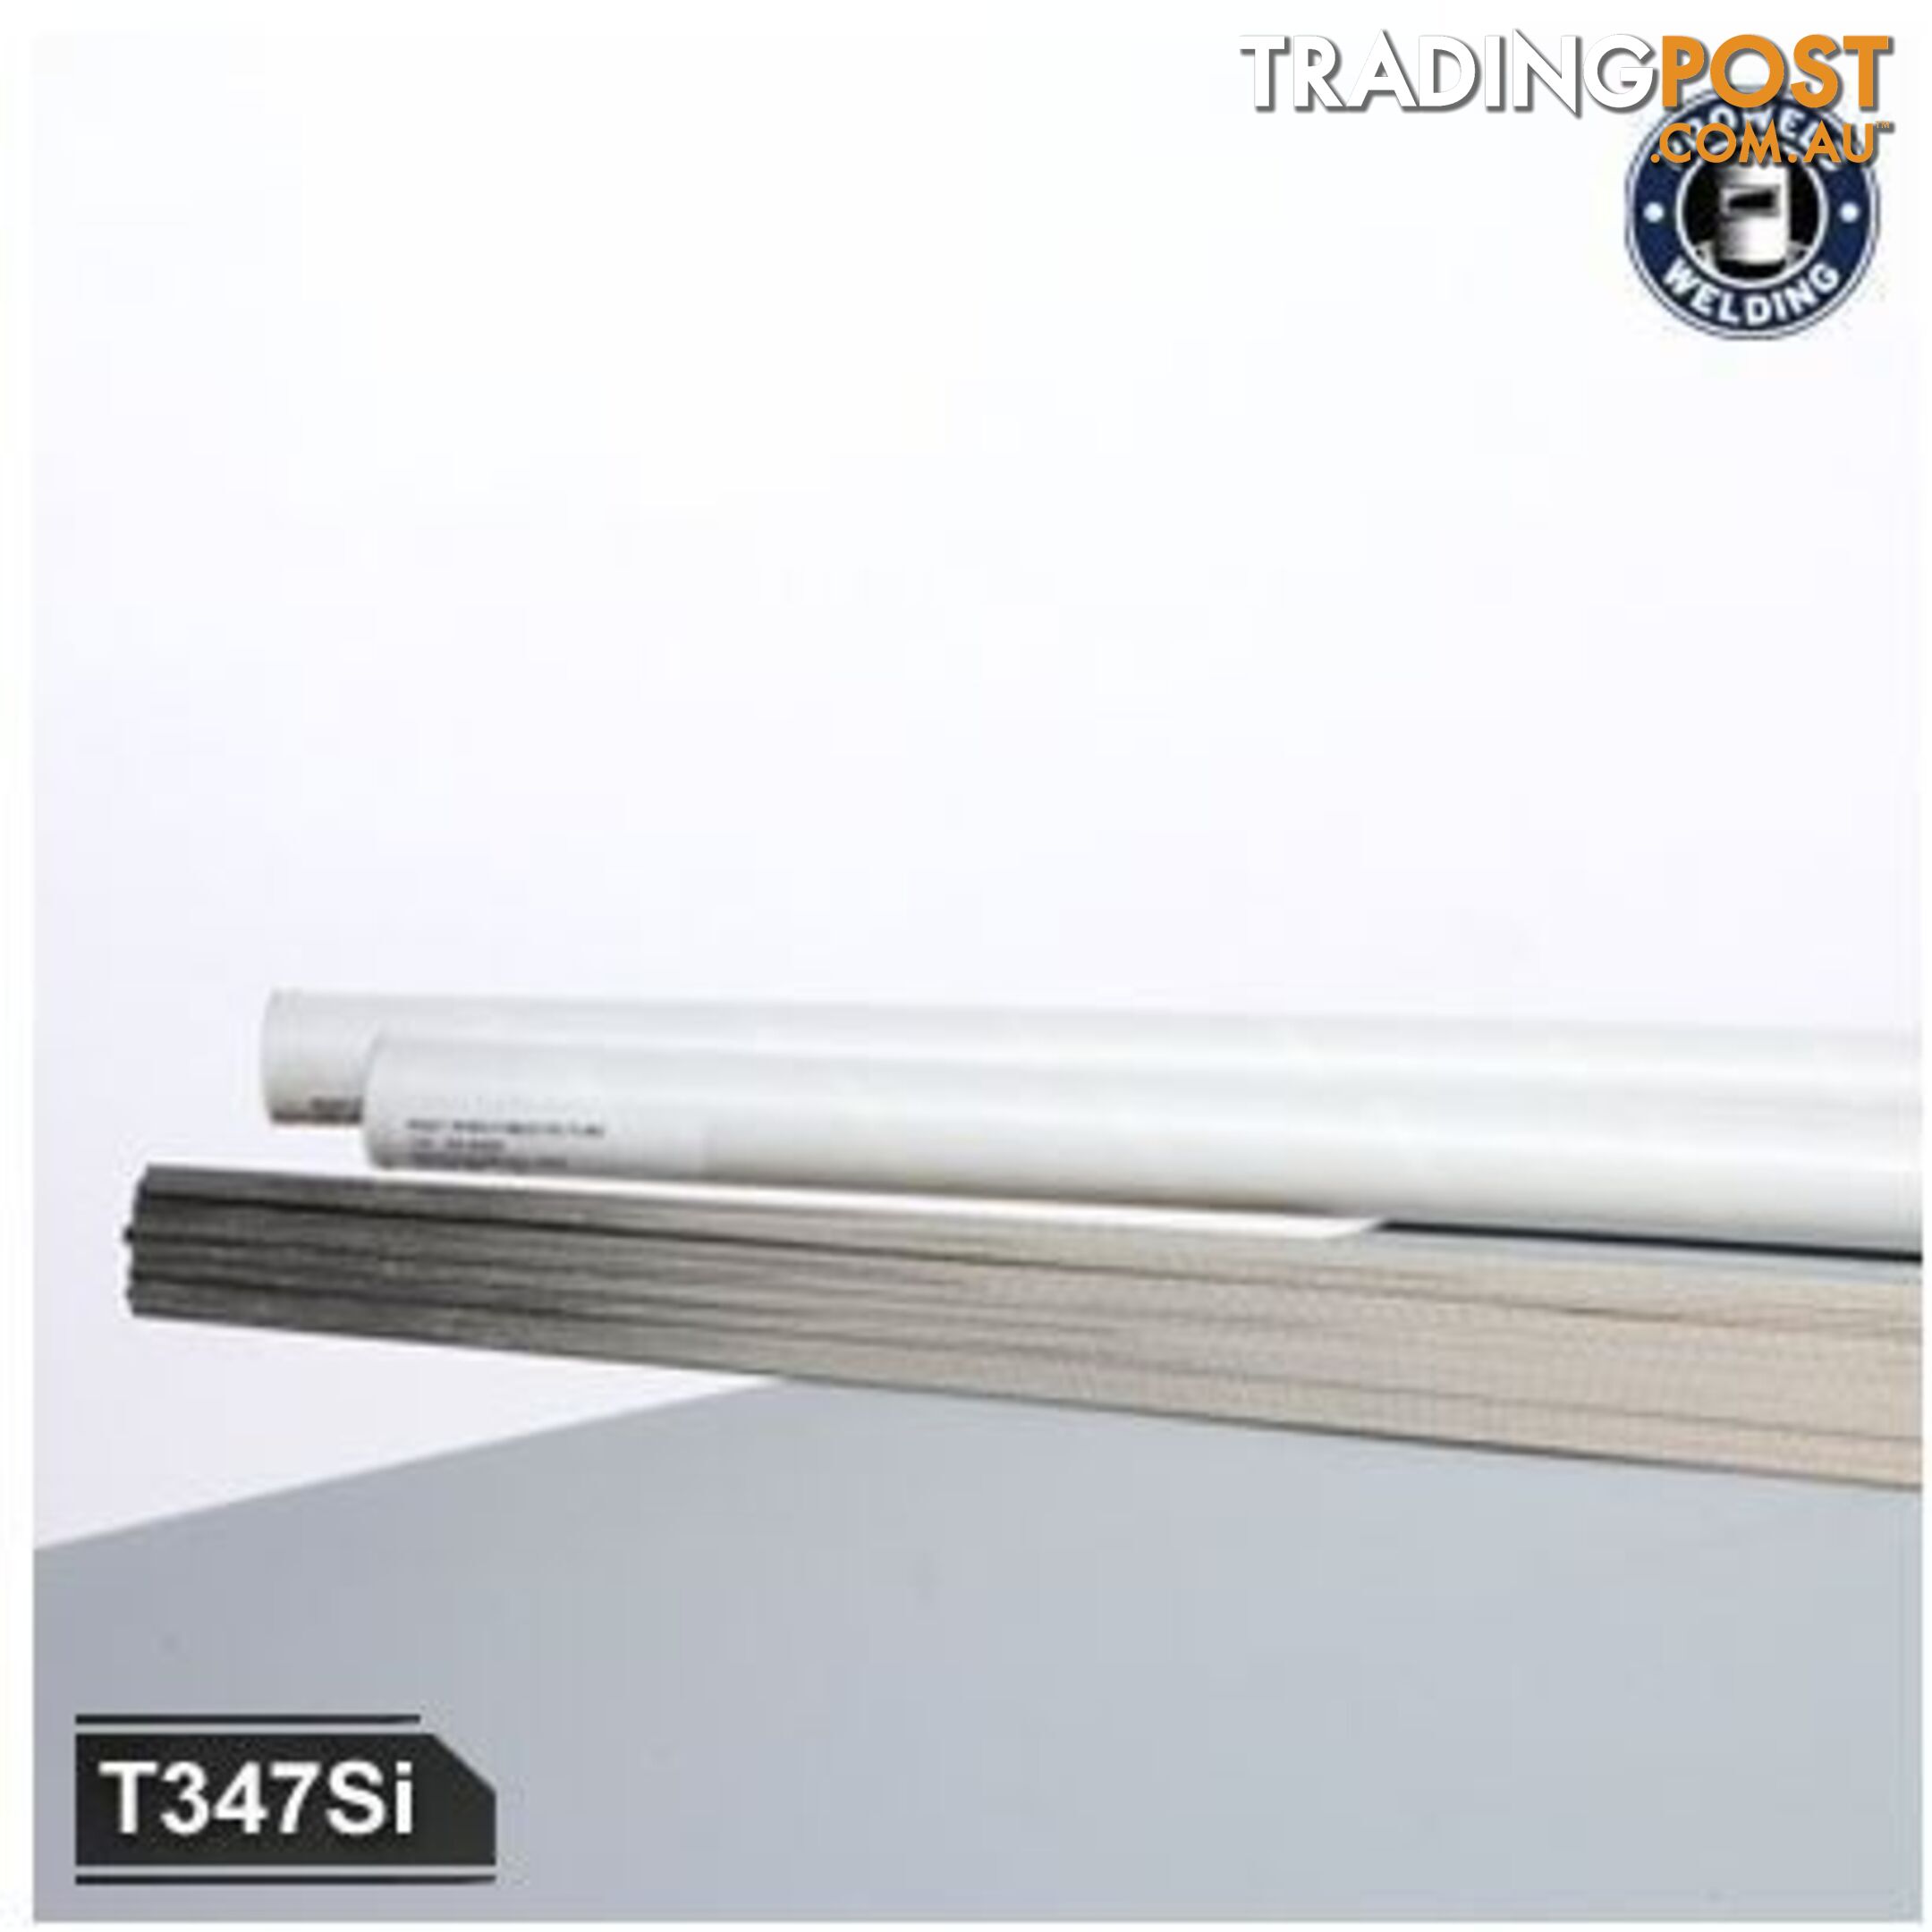 347Si Stainless Steel Tig Rods 3.2mm 5Kg Proweld T347Si32S